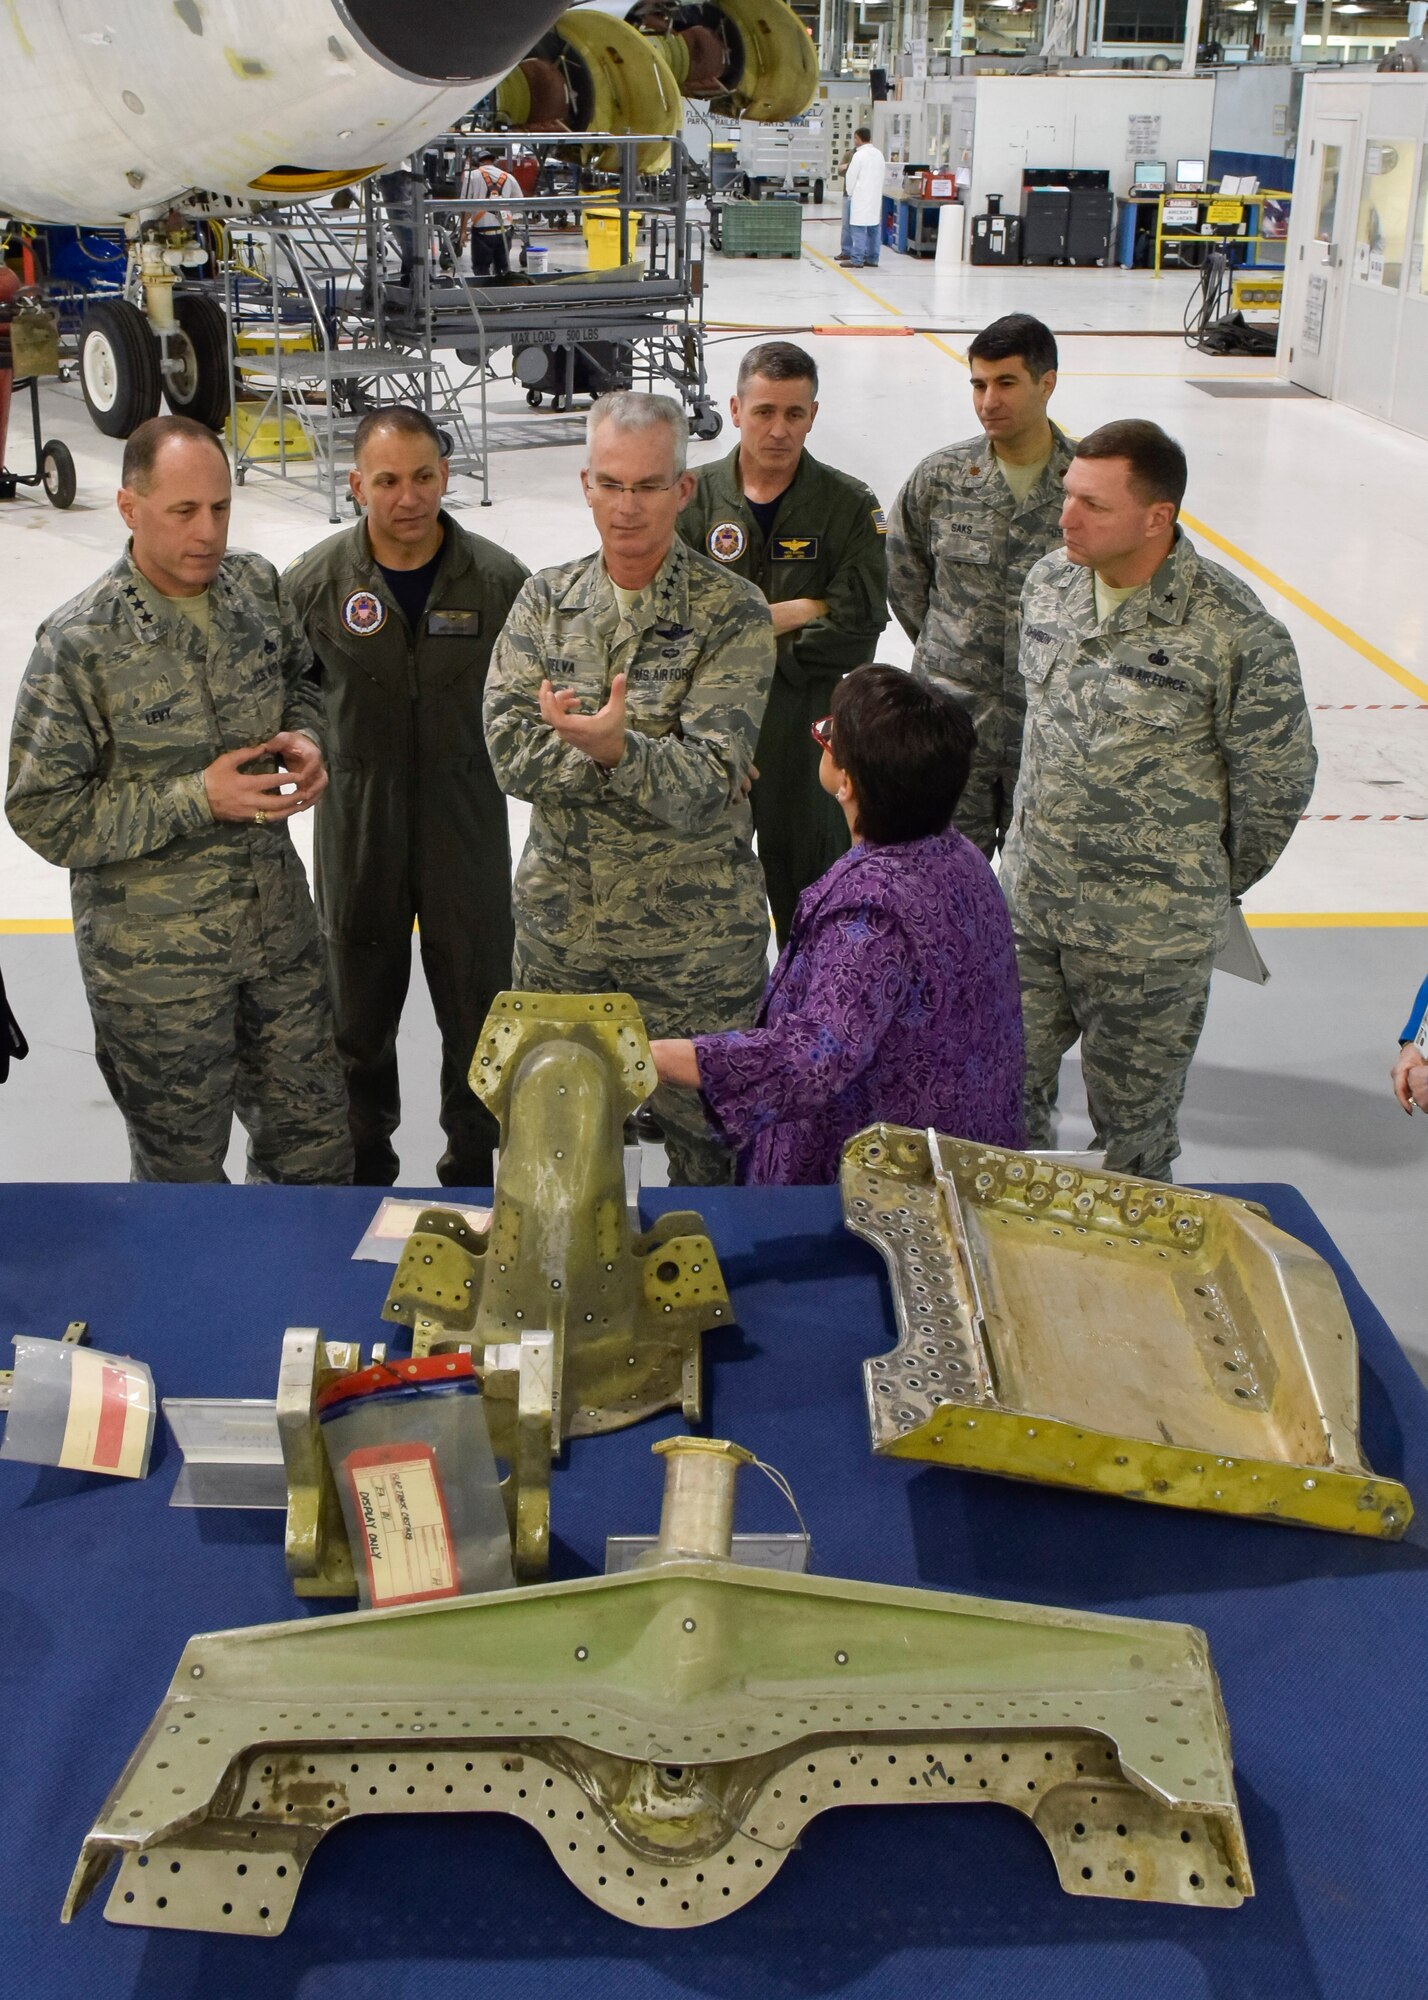 Gen. Paul J. Selva, Vice Chairman of the
Joint Chiefs of Staff, center foreground, receives a briefing by Ms. Theresa
Farris, 564th Aircraft Maintenance Squadron director, on how the Oklahoma
City Air Logistics Complex supports the nuclear mission to include the
KC-135, B-52, B-2, commodities, software and engines. The briefing was held
Friday in Bldg. 3001, Dock 9 ½, at Tinker Air Force Base. (U.S. Air Force
photo by Greg L. Davis)
